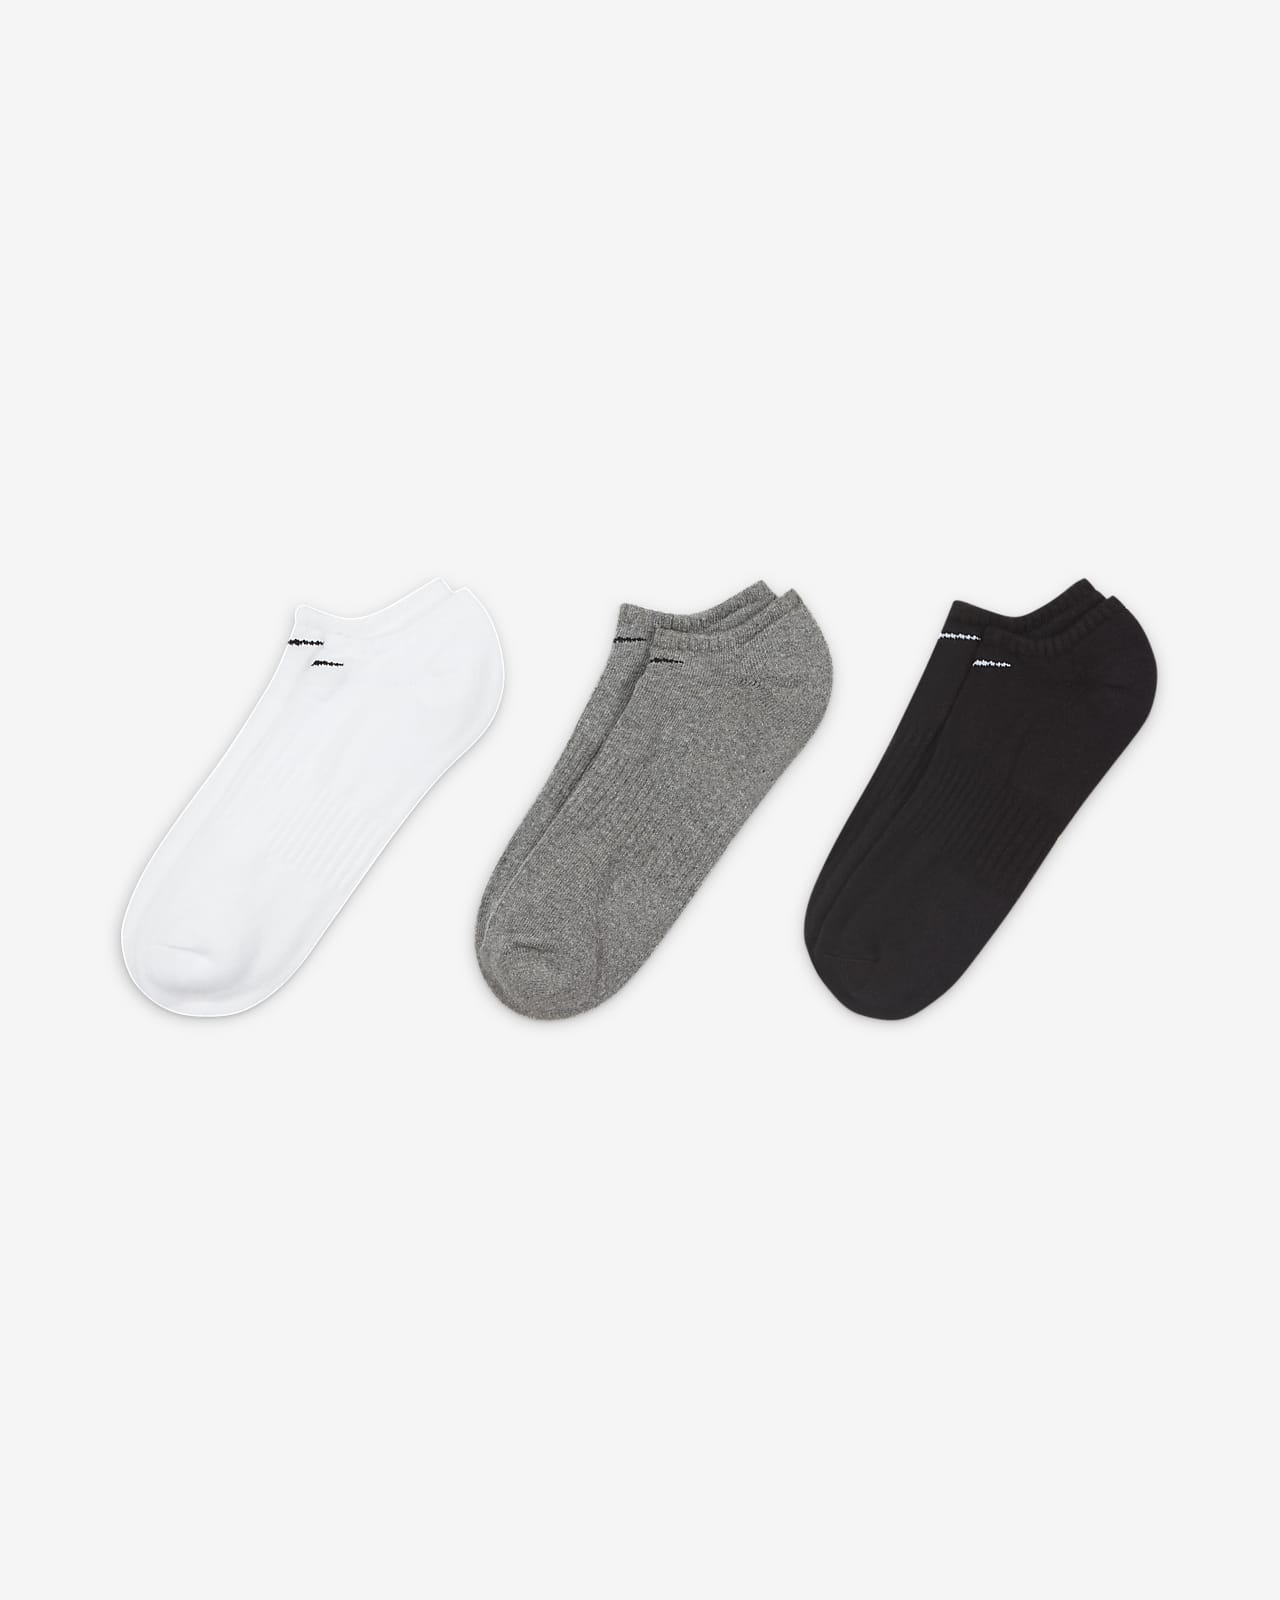 Chaussettes de training invisibles Nike Everyday Cushioned (3 paires). Nike FR